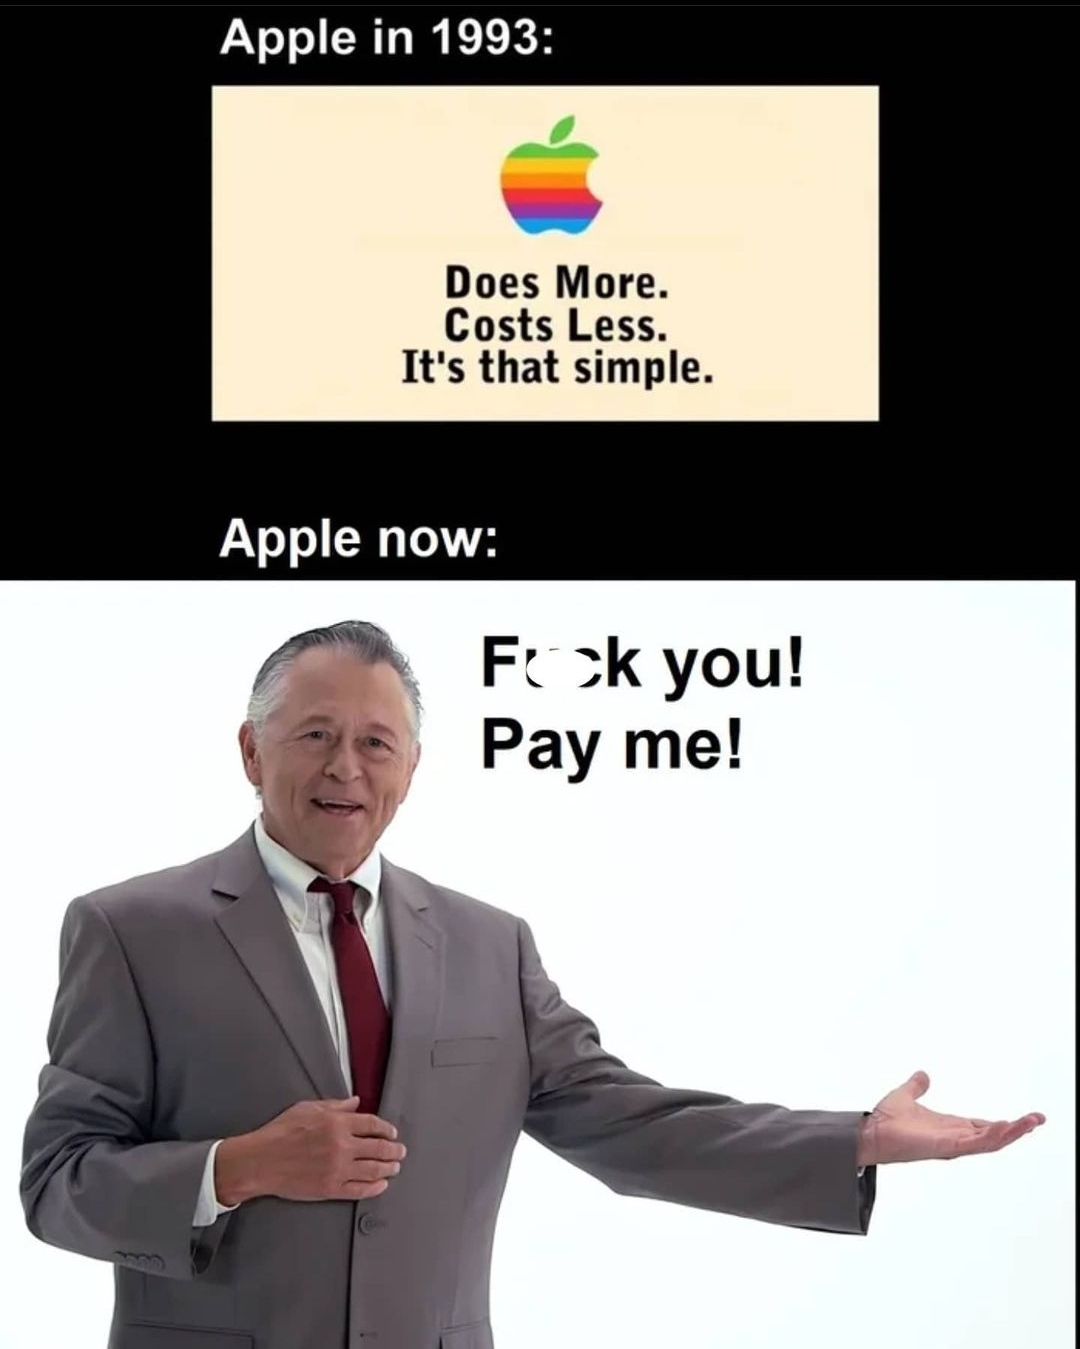 apple - Apple in 1993 Does More. Costs Less. It's that simple. Apple now Fok you! Pay me!